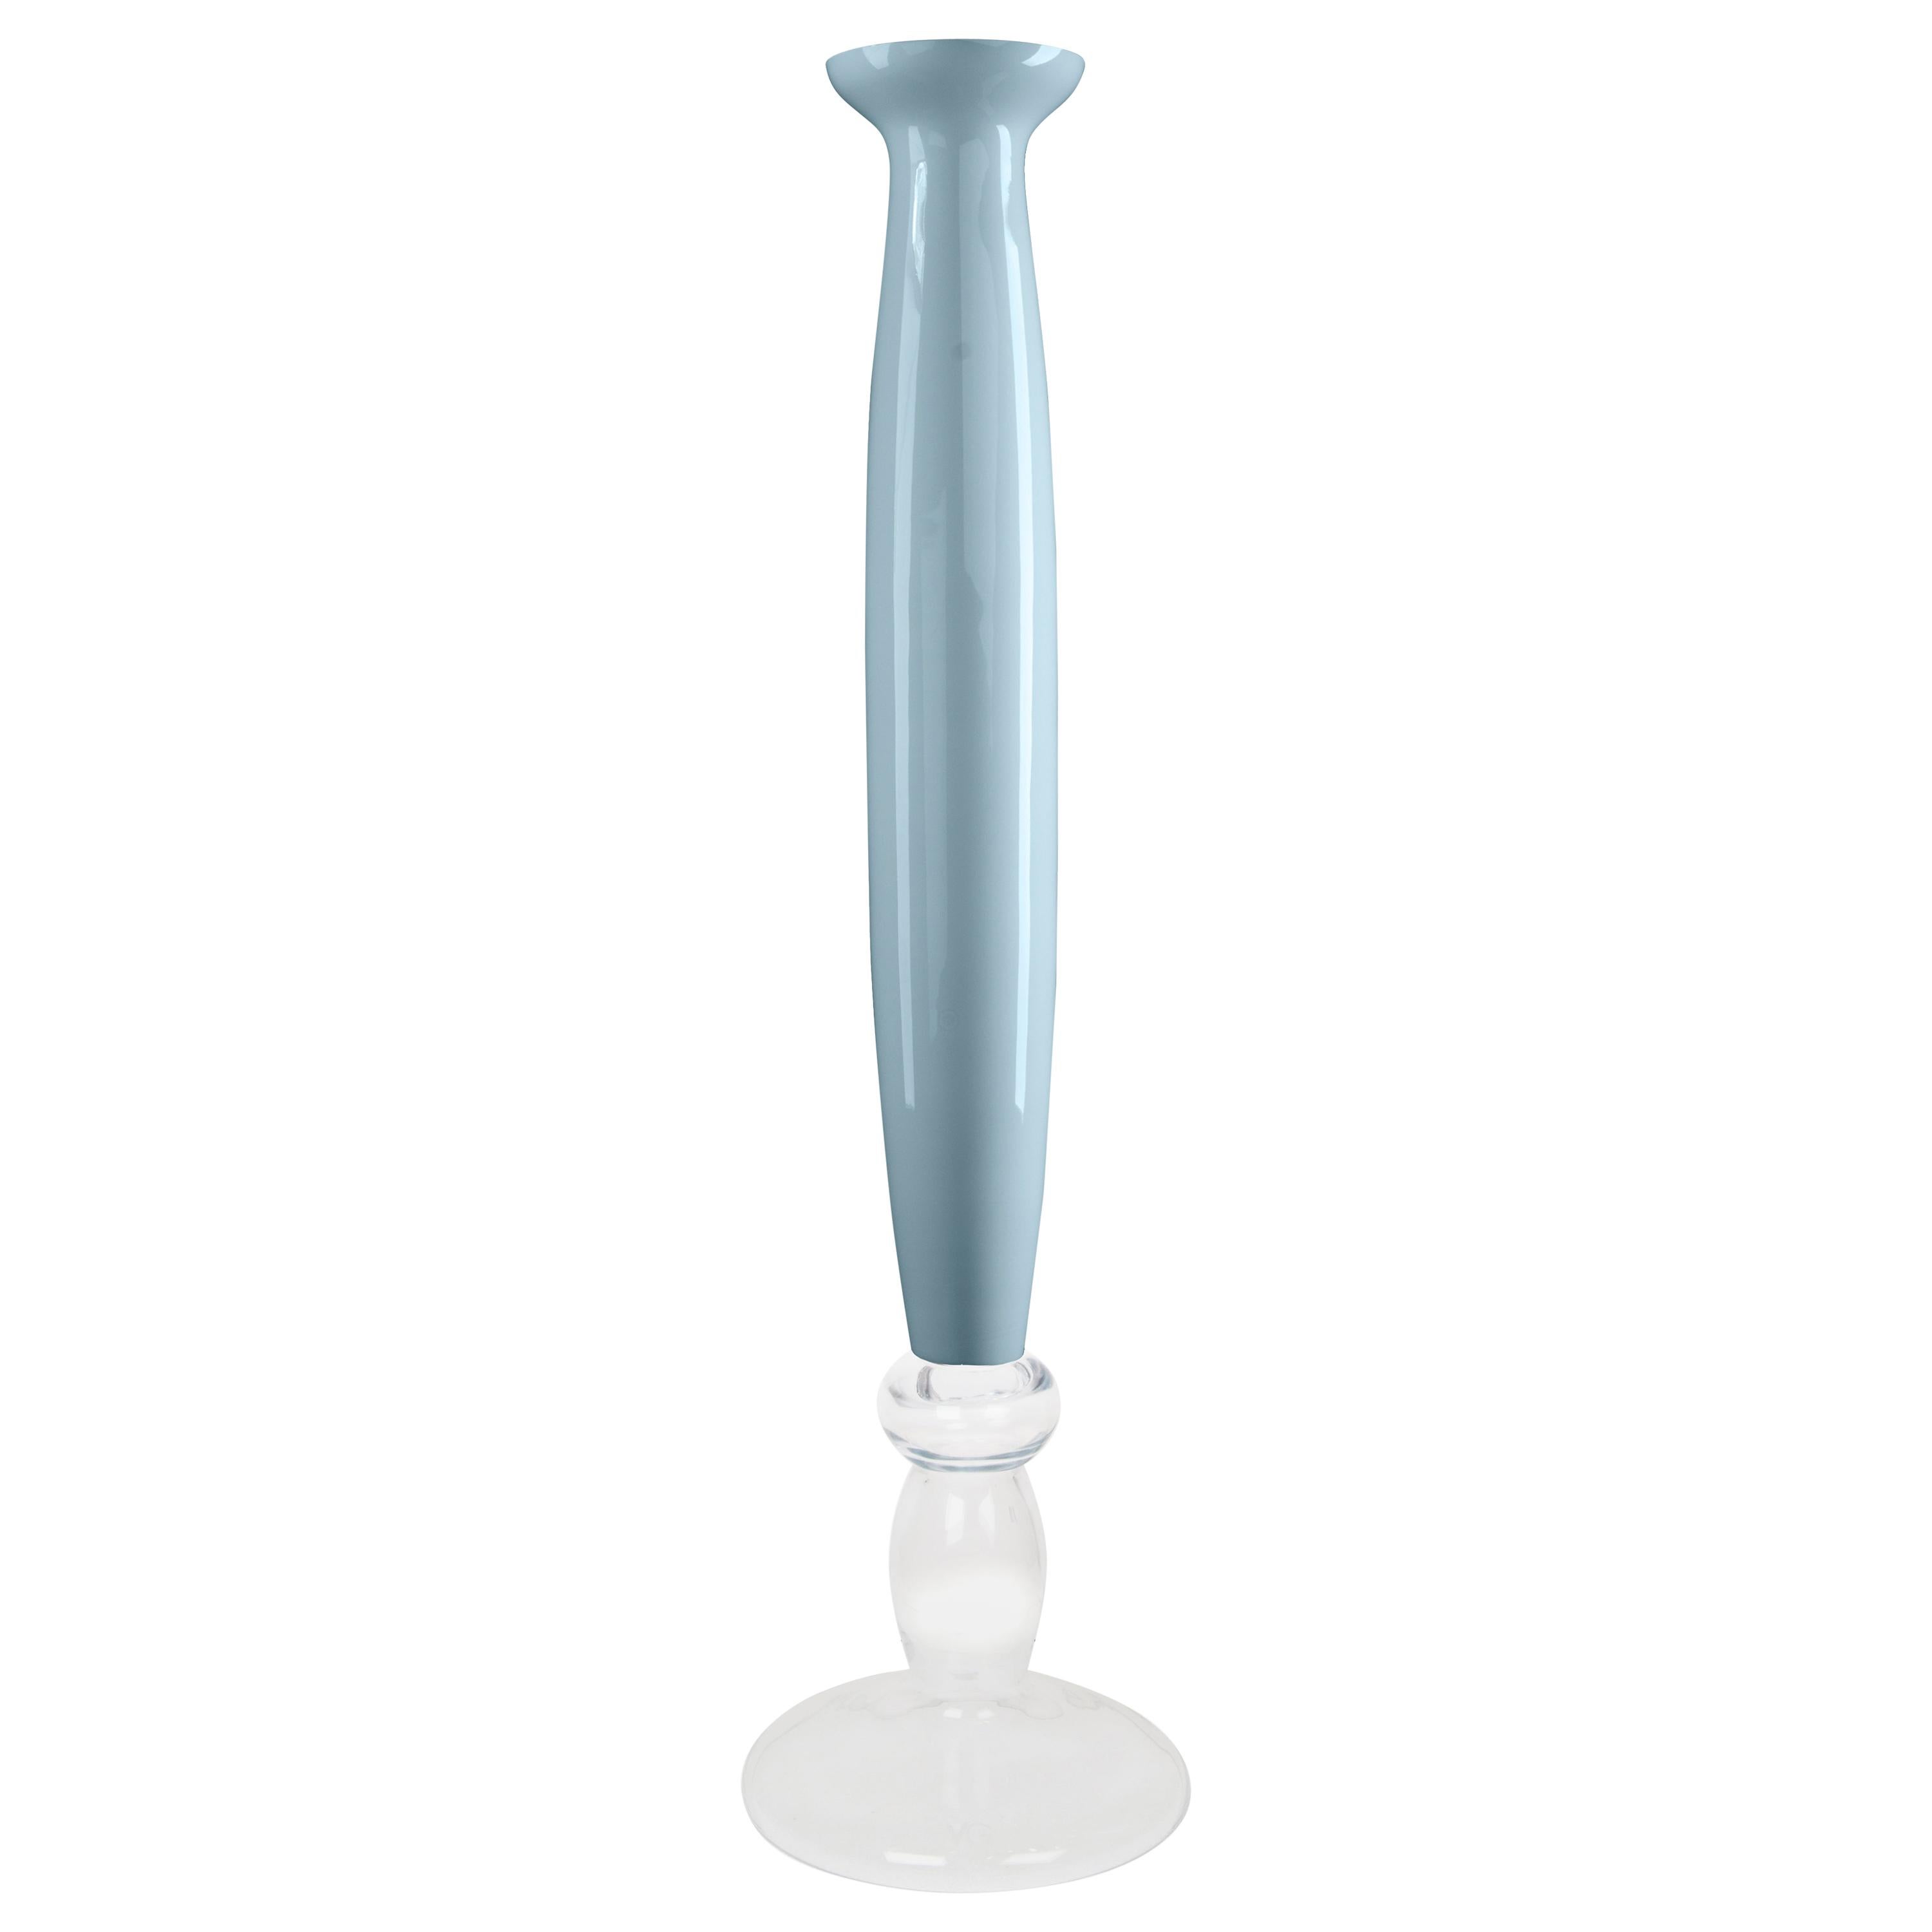 Vase Mercurio, Purist Blue Color, 2020 Trend, and Clear, in Glass, Italy